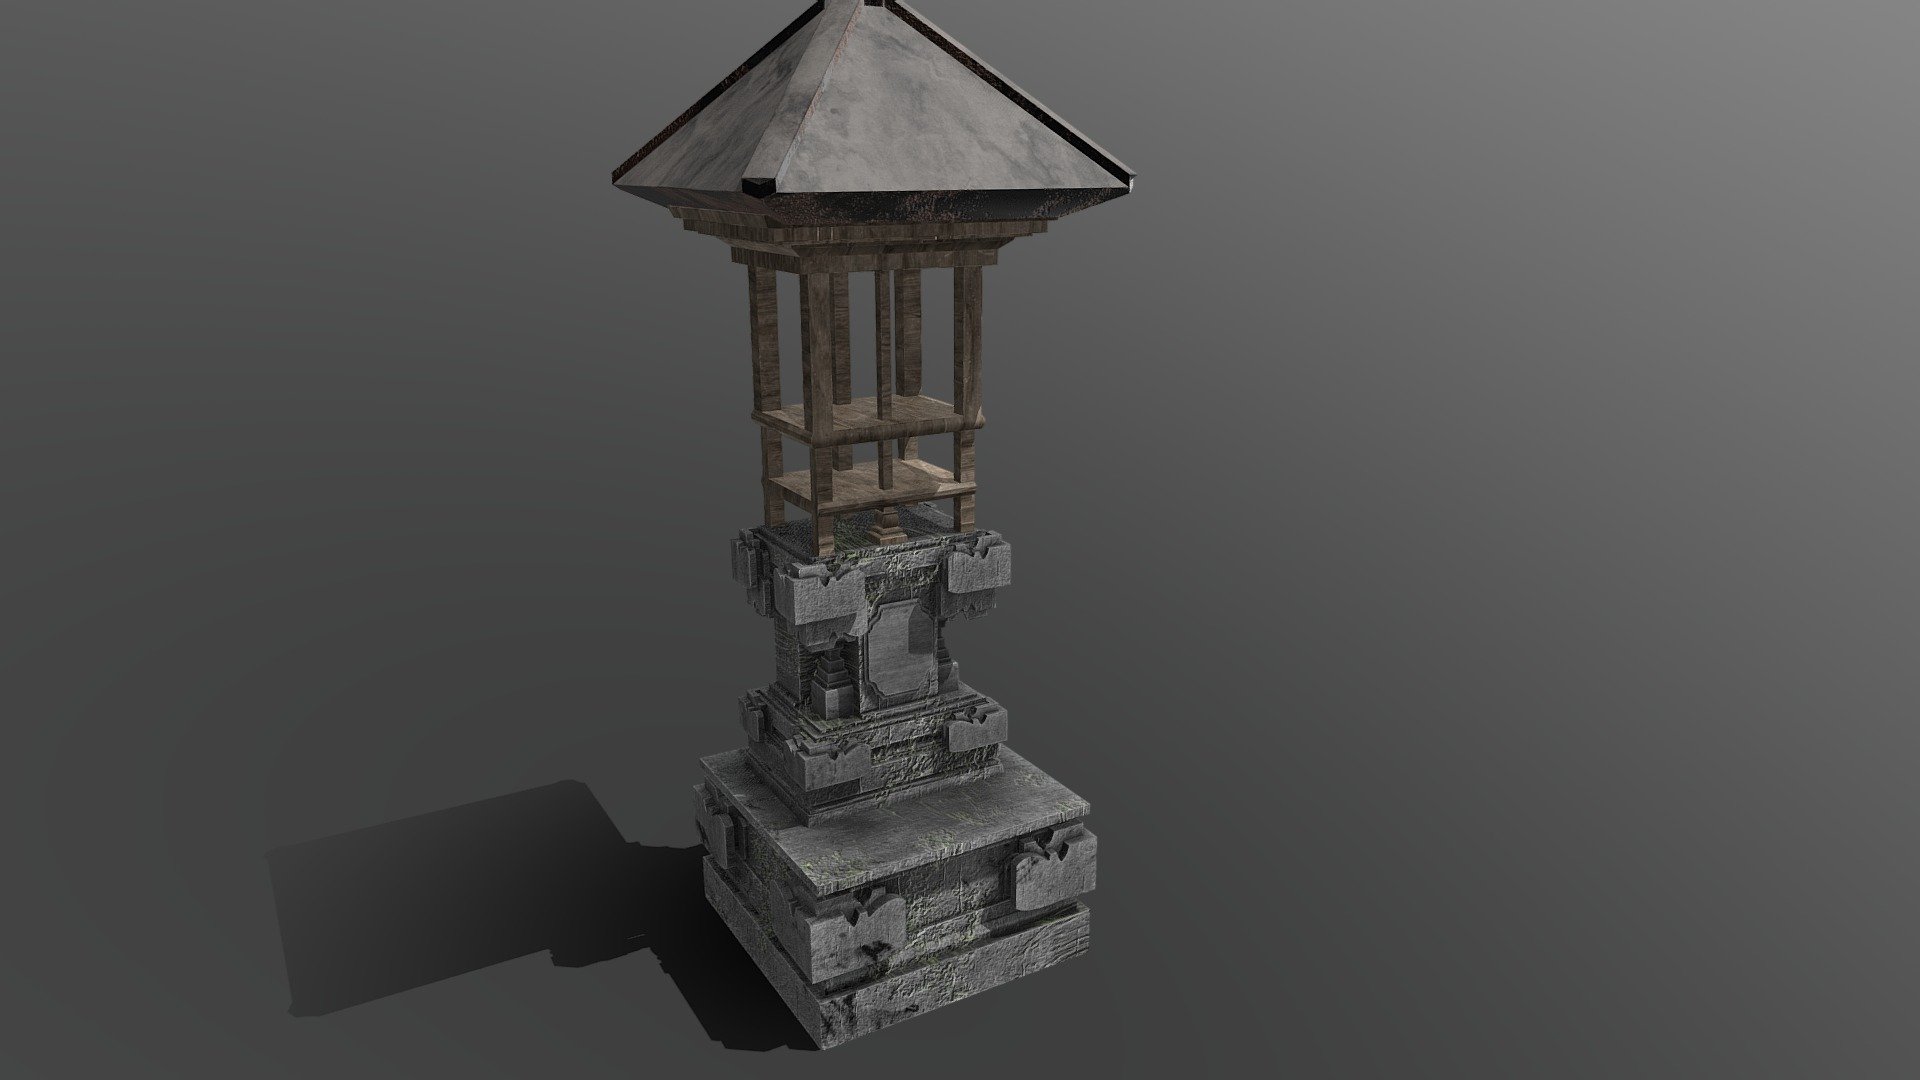 Game Asset Object Merajan / Sanggah From Bali Culture
Create = Blender
Texturing = Substance Painter

About Merajan / Sanggah
Mrajan or Sanggah Pamerajan comes from the word: Sanggah, meaning Sanggar = holy place; Pamerajan comes from Praja = family. So Sanggah Pamerajan means = a sacred place for a certain family. For brevity, people call it in short: Sanggah, or Merajan - Merajan / Sanggah Bali Game Asset v2 - 3D model by solodevelopment97 3d model